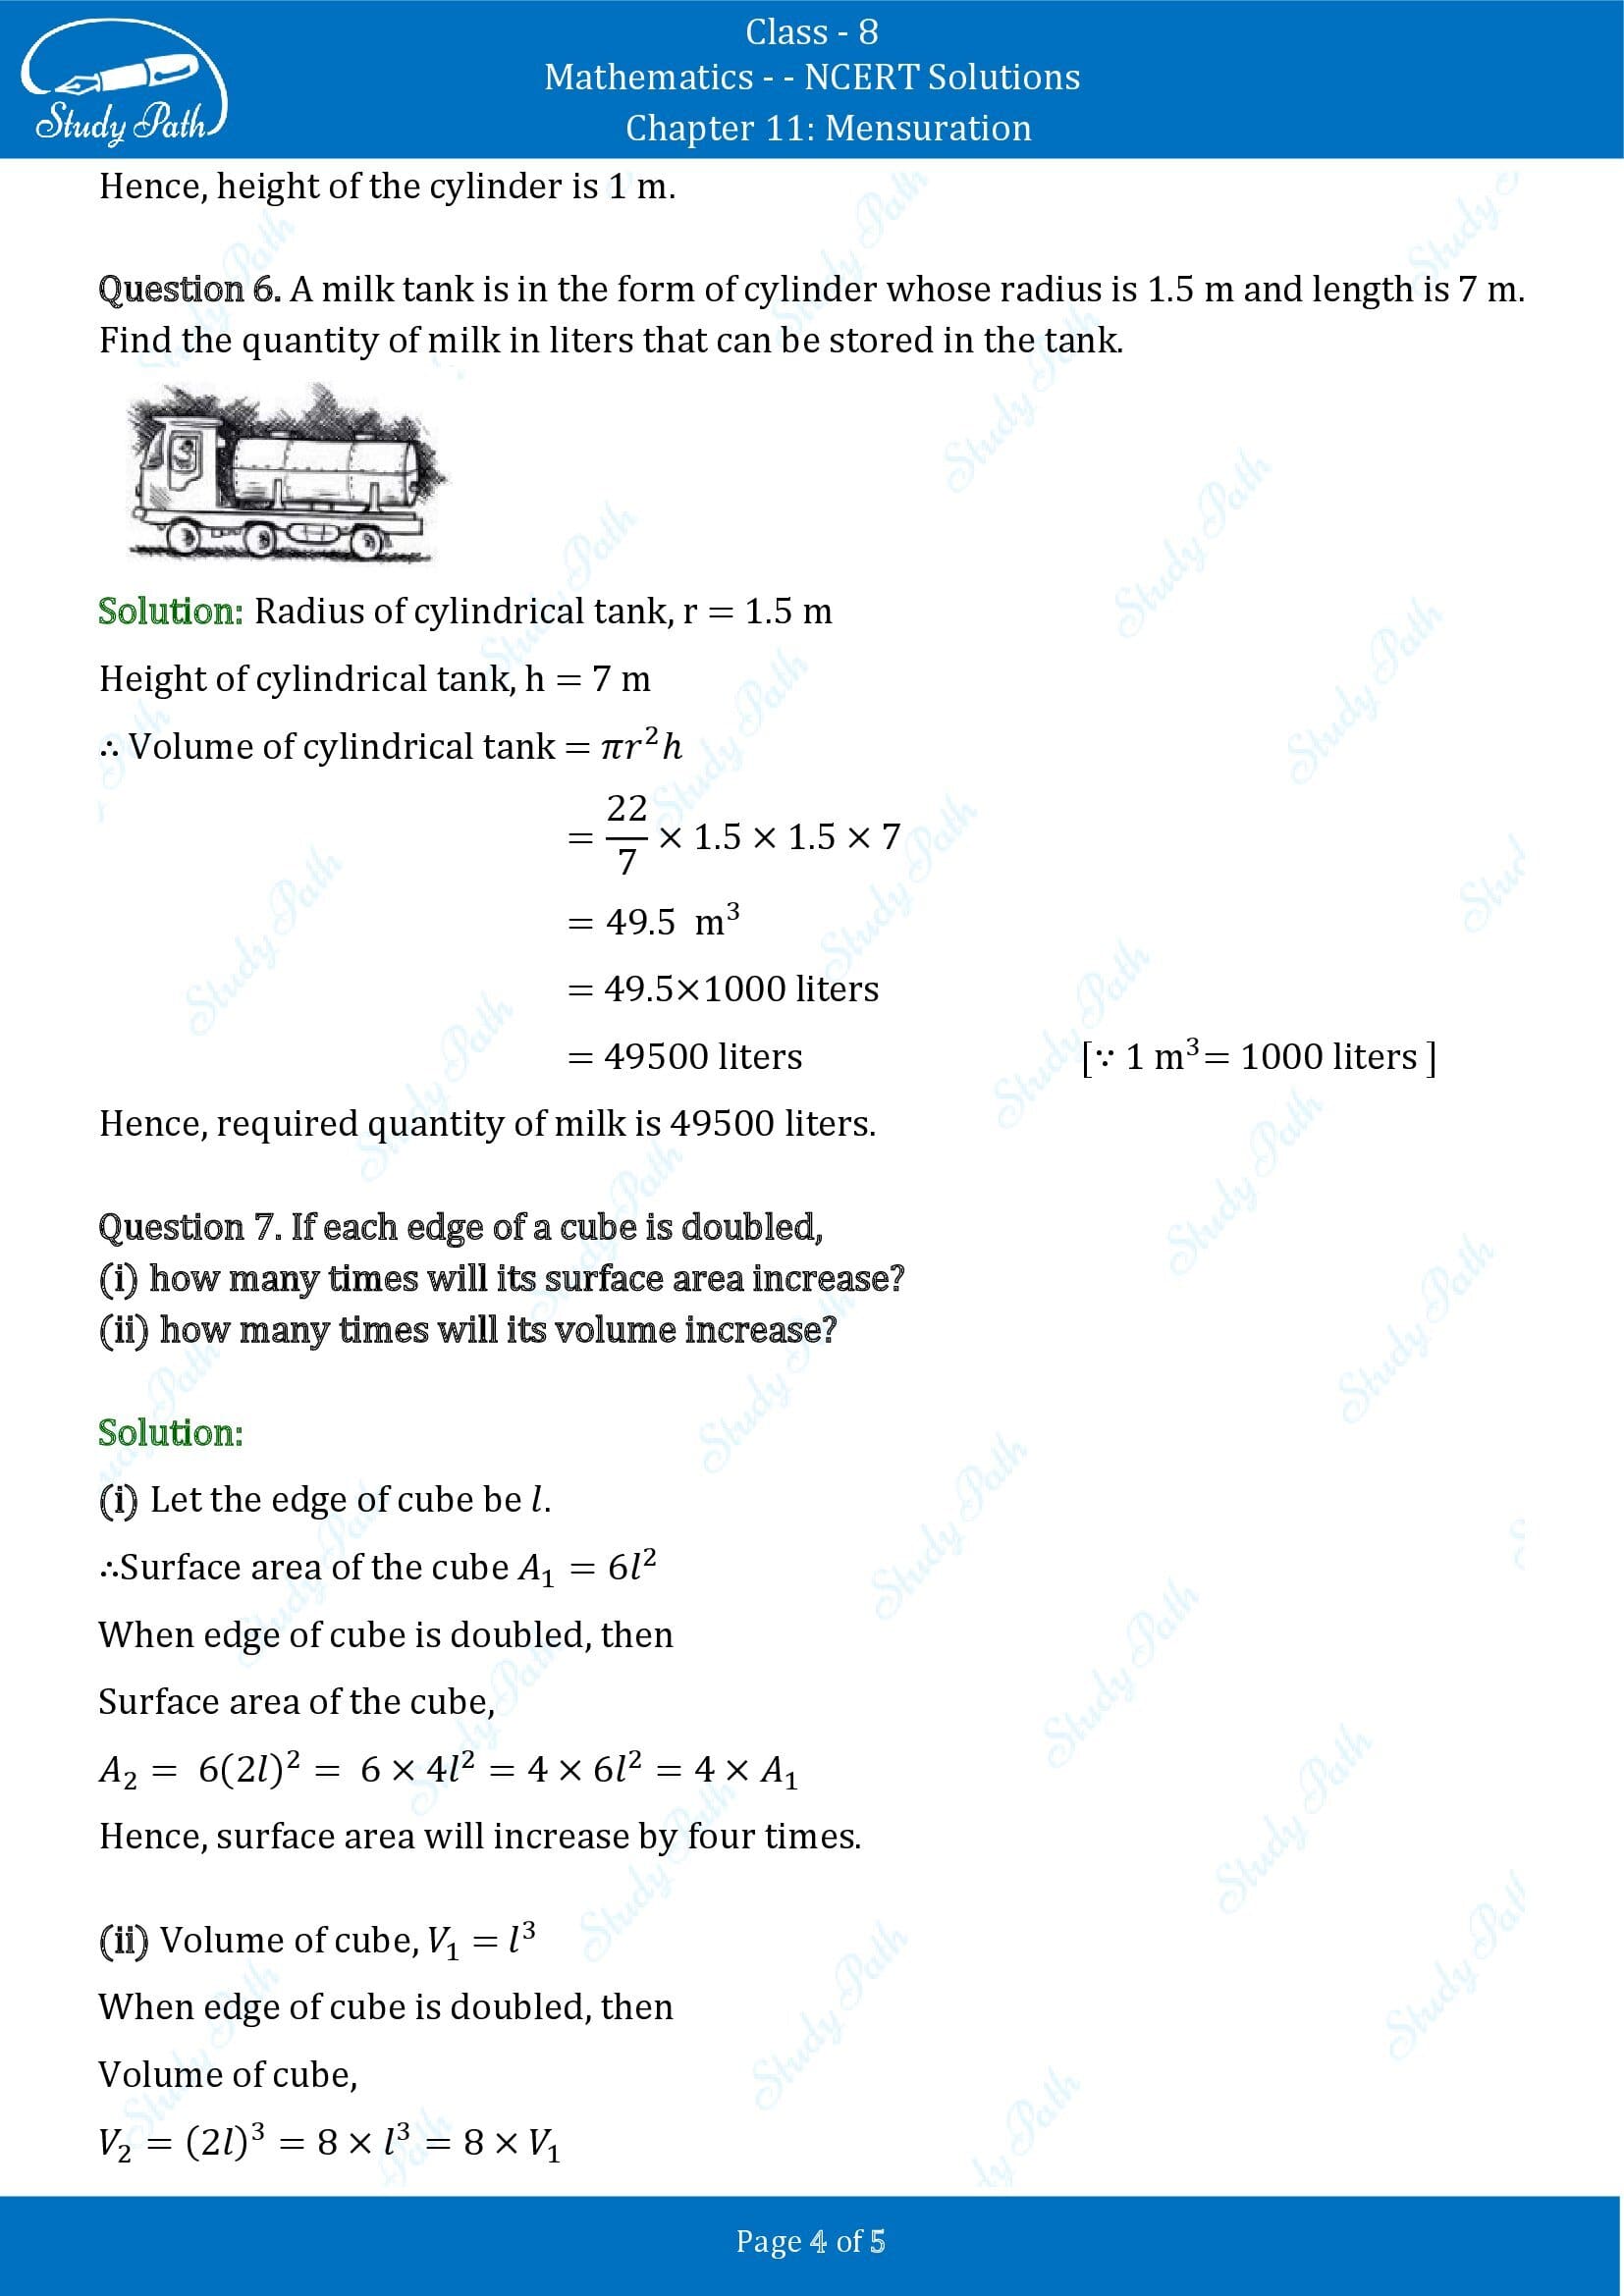 NCERT Solutions for Class 8 Maths Chapter 11 Mensuration Exercise 11.4 00004